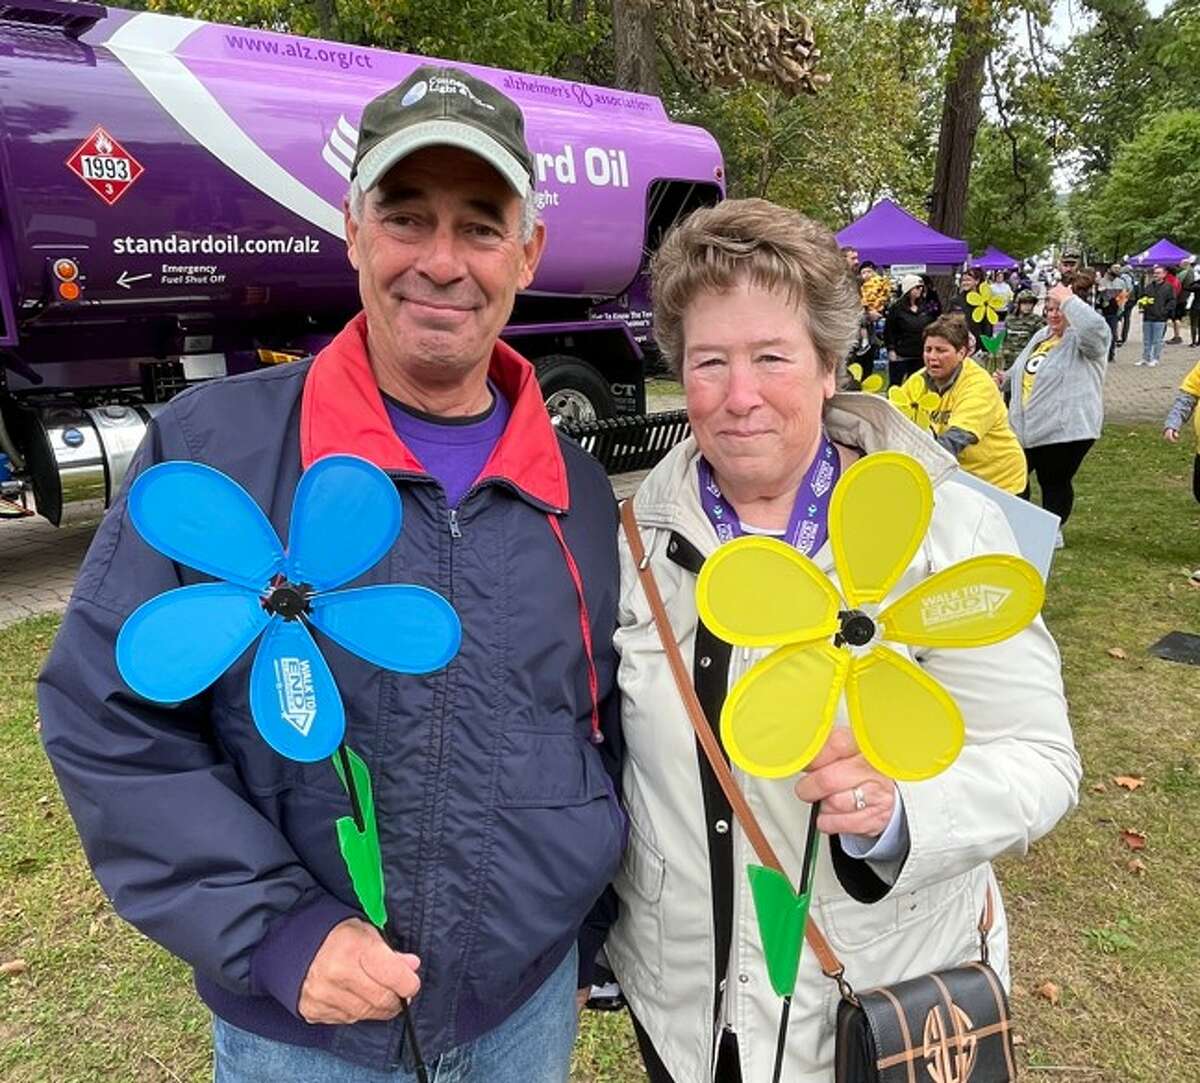 Jim and Susan Sirois at the 2022 Central Walk to End Alzheimer's, holding flowers: Blue representing those living with Alzheimer's and yellow representing caregivers.